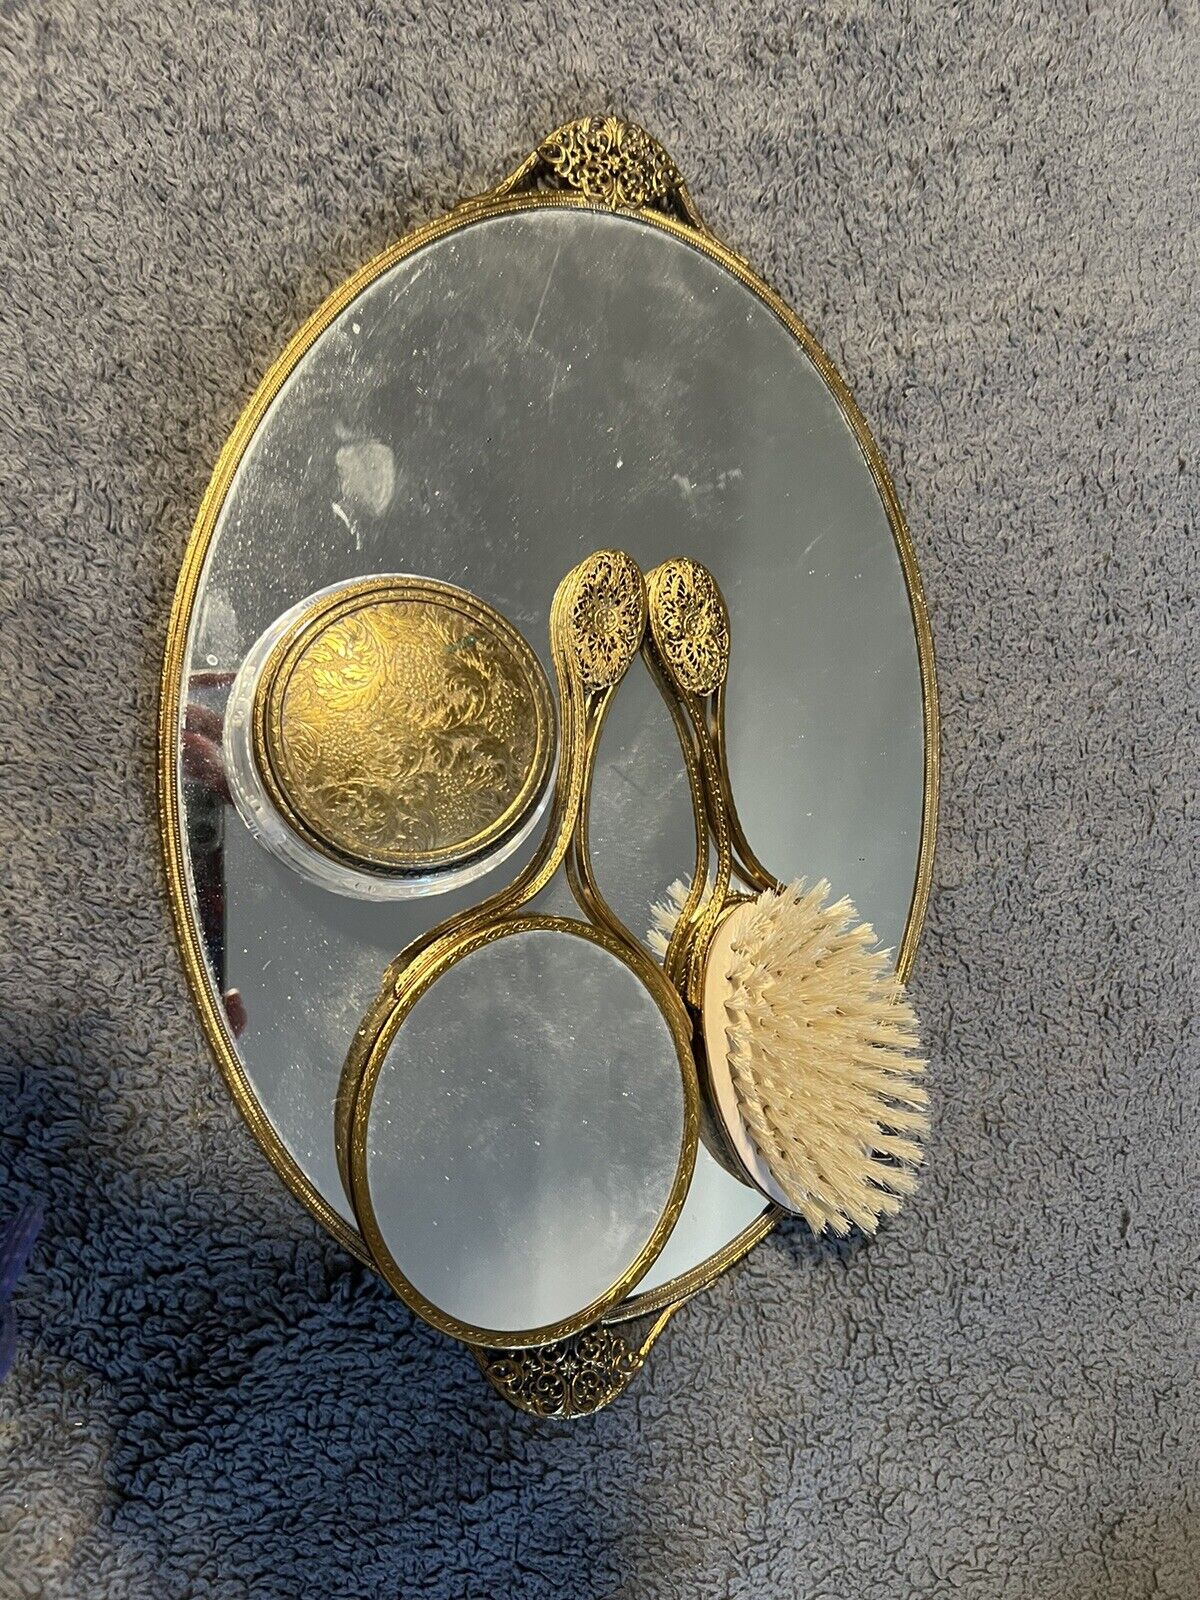 Vintage 4 pc Brass & Embroidered Vanity Set With Mirrored Tray